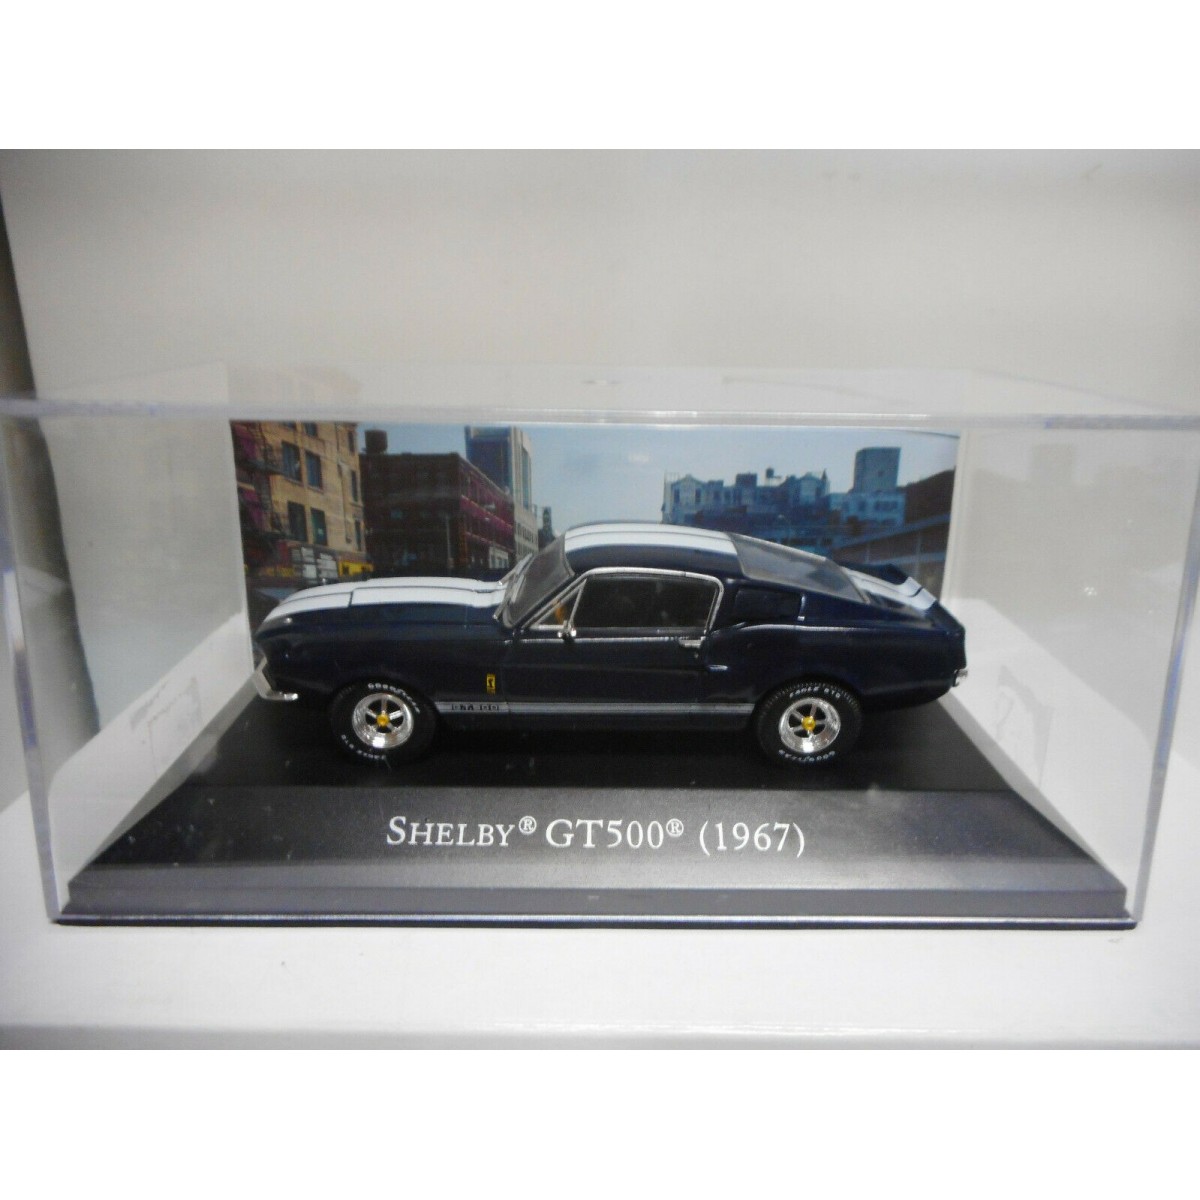 VOITURE FORD MUSTANG SHELBY GT 500 1967 1/43 ème AMERICAN CARS N°1 ALTAYA 